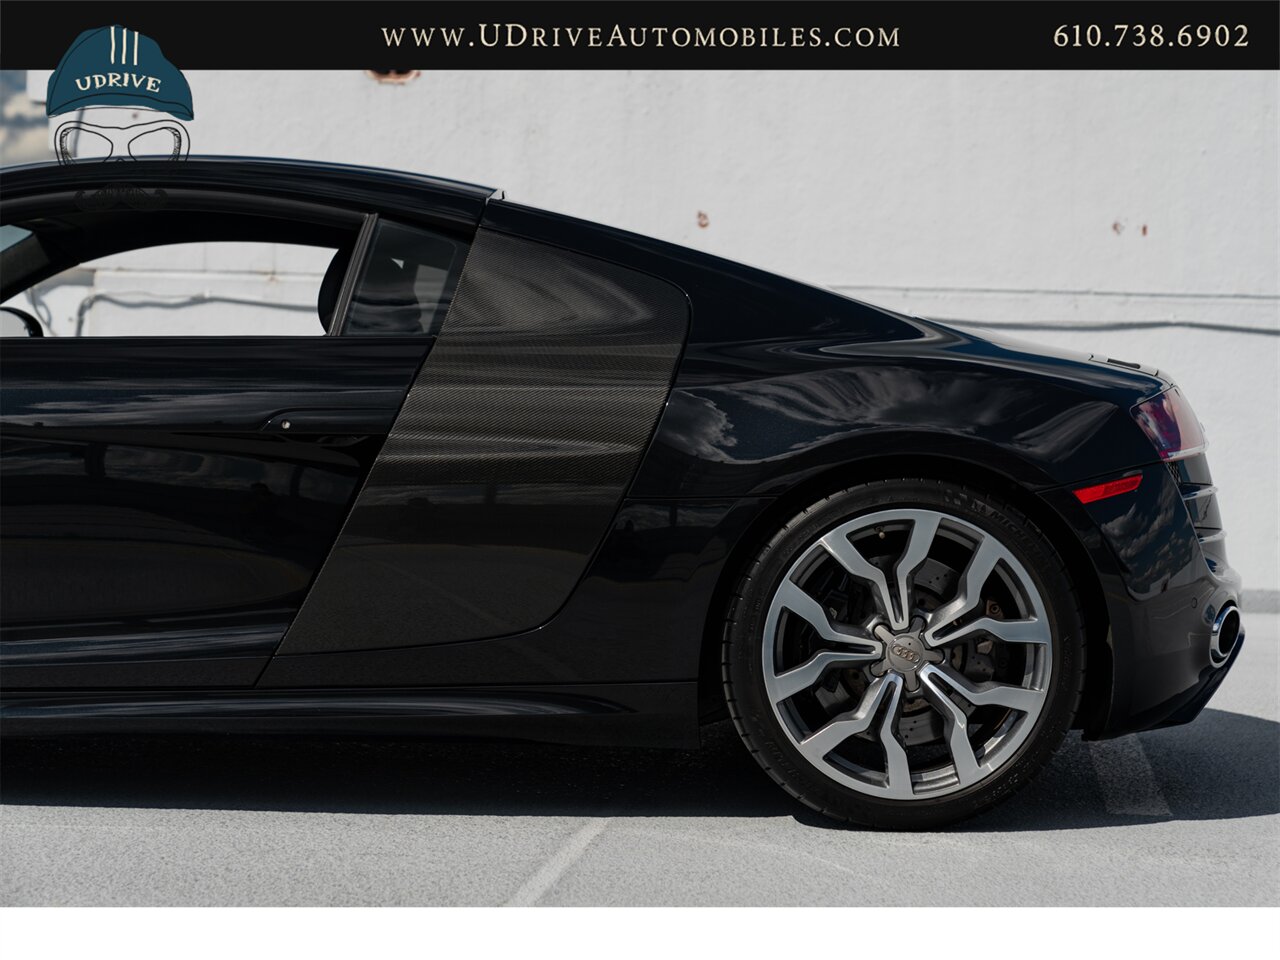 2011 Audi R8 5.2 Quattro  V10 6 Speed Manual - Photo 24 - West Chester, PA 19382